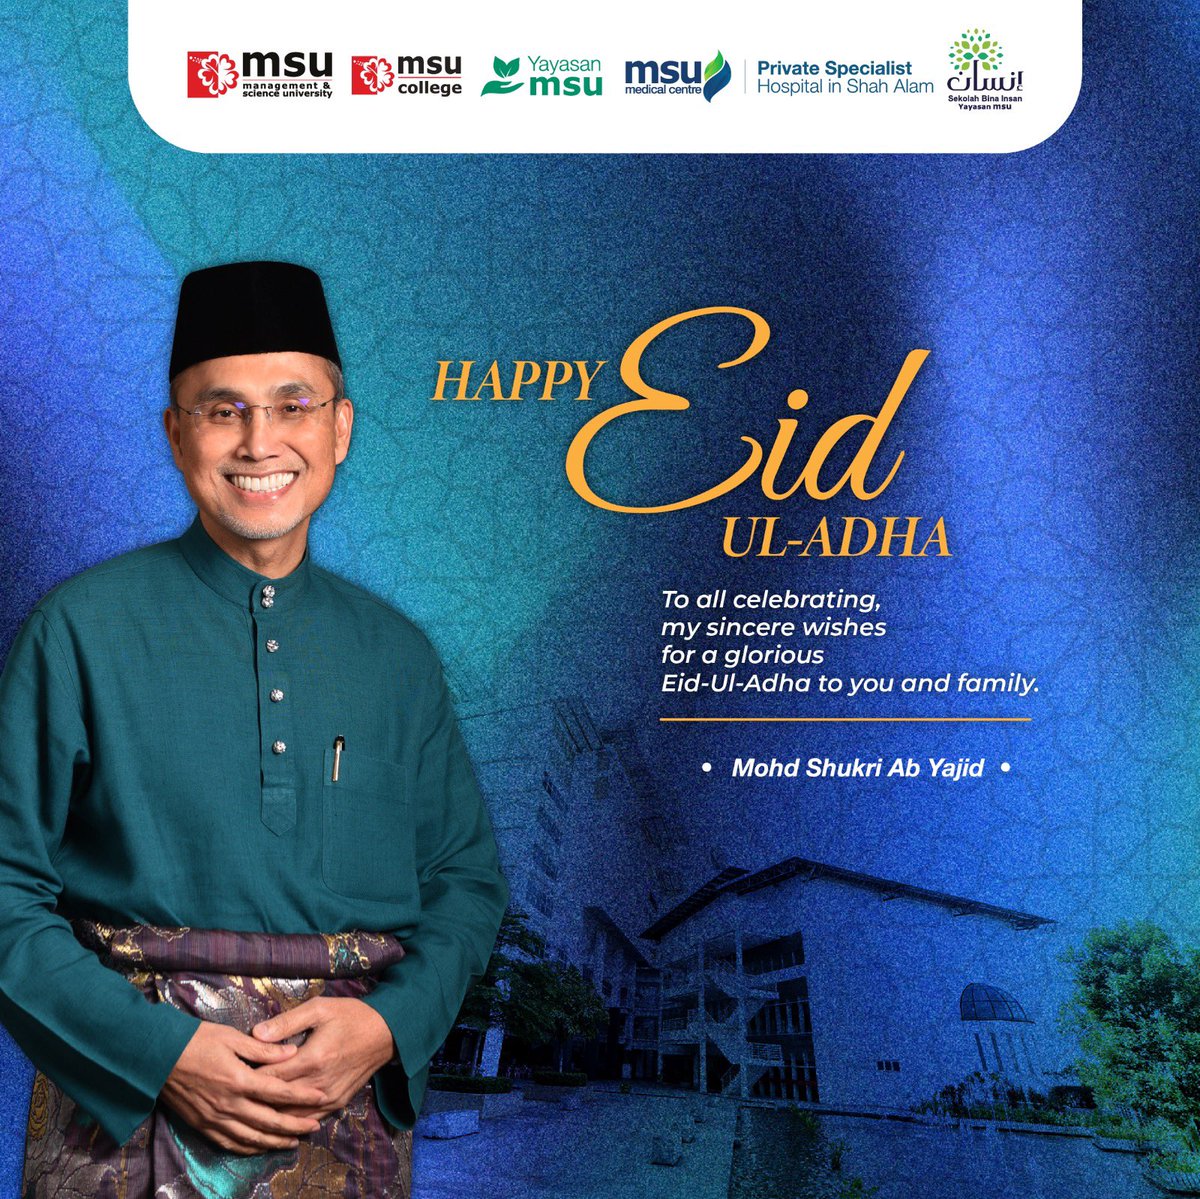 Wishing everyone a happy, blessed and peaceful #Eiduladha. May this special day be filled with immense joy and prosperity, as we reflect on our deeds and life's journey. Stay safe and take care. @MSUmalaysia @MSUcollege @msumcmalaysia @sbiyayasanmsu @YayasanMSU